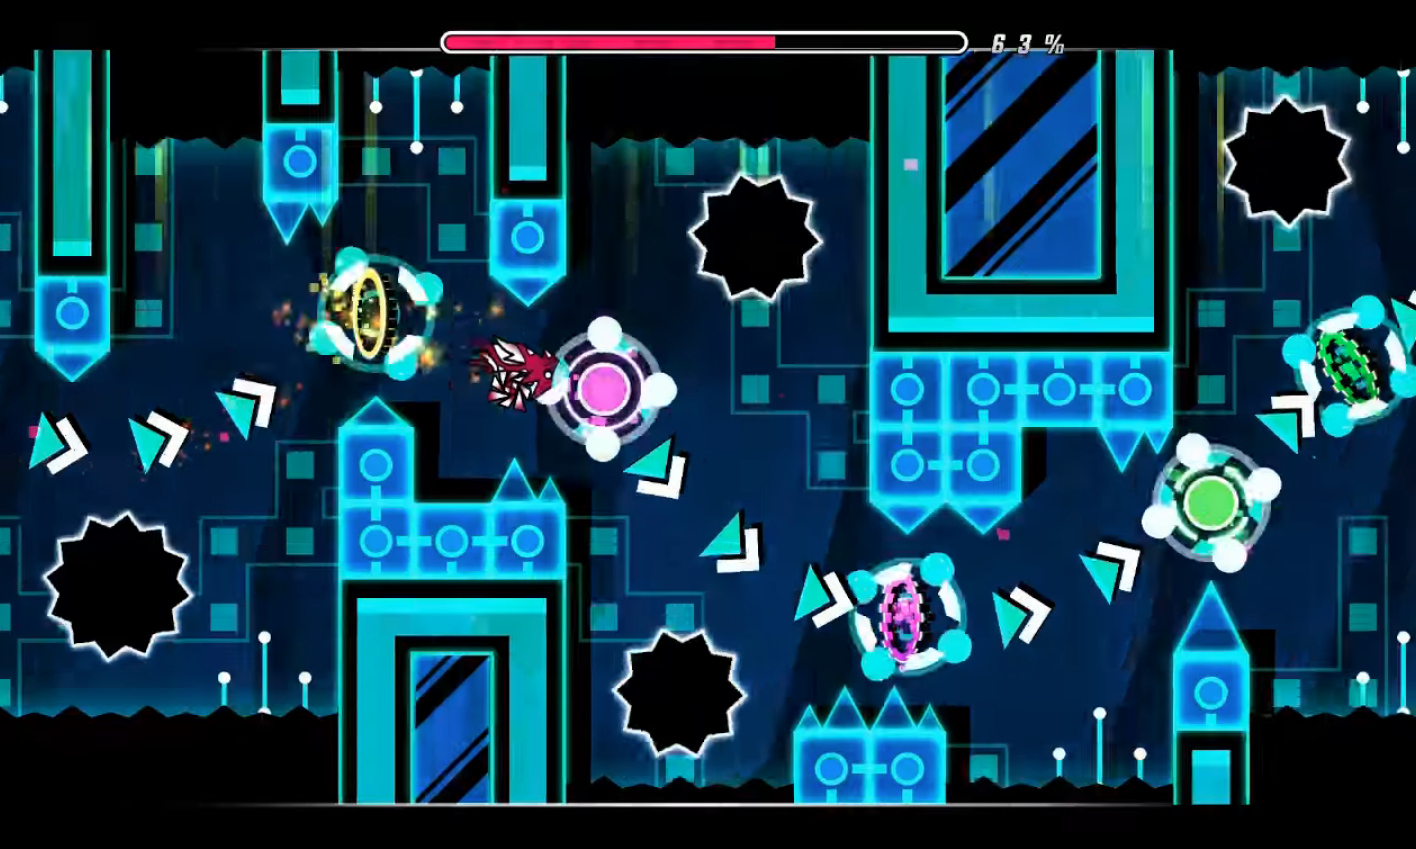 Destiny 2 X Geometry Dash Collab is Coming Soon